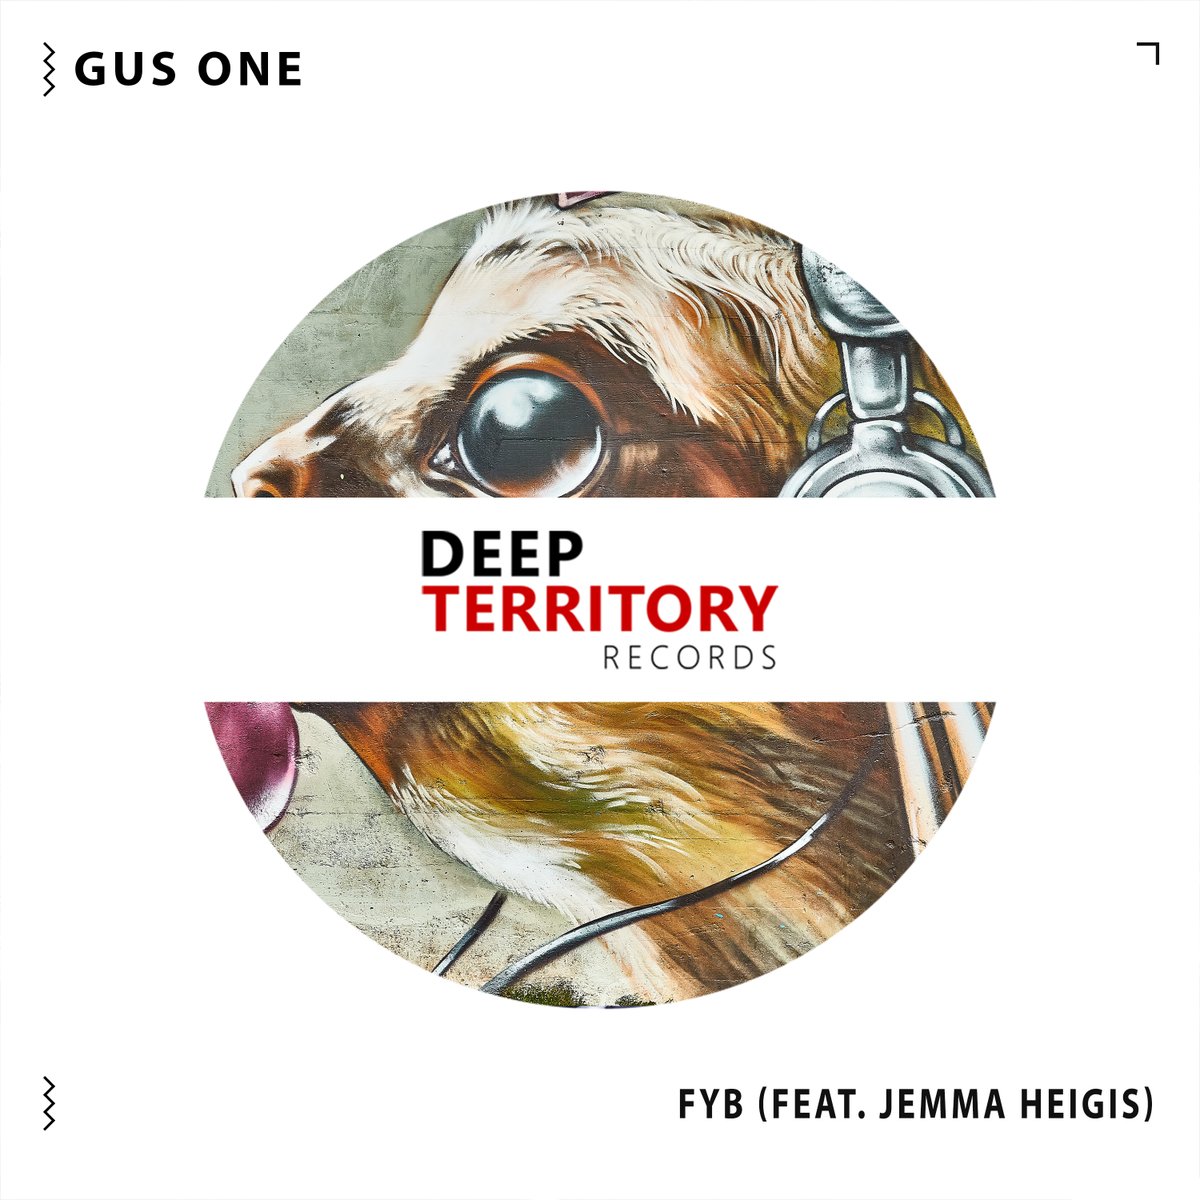 21st Oct. New collab with the super-talented 
@jemthecatlover
Mixed and mastered by @Nolan_DJ
#GusOne #jemmaheigis 
#deepterritory #deephouse #deepdisco #nudisco